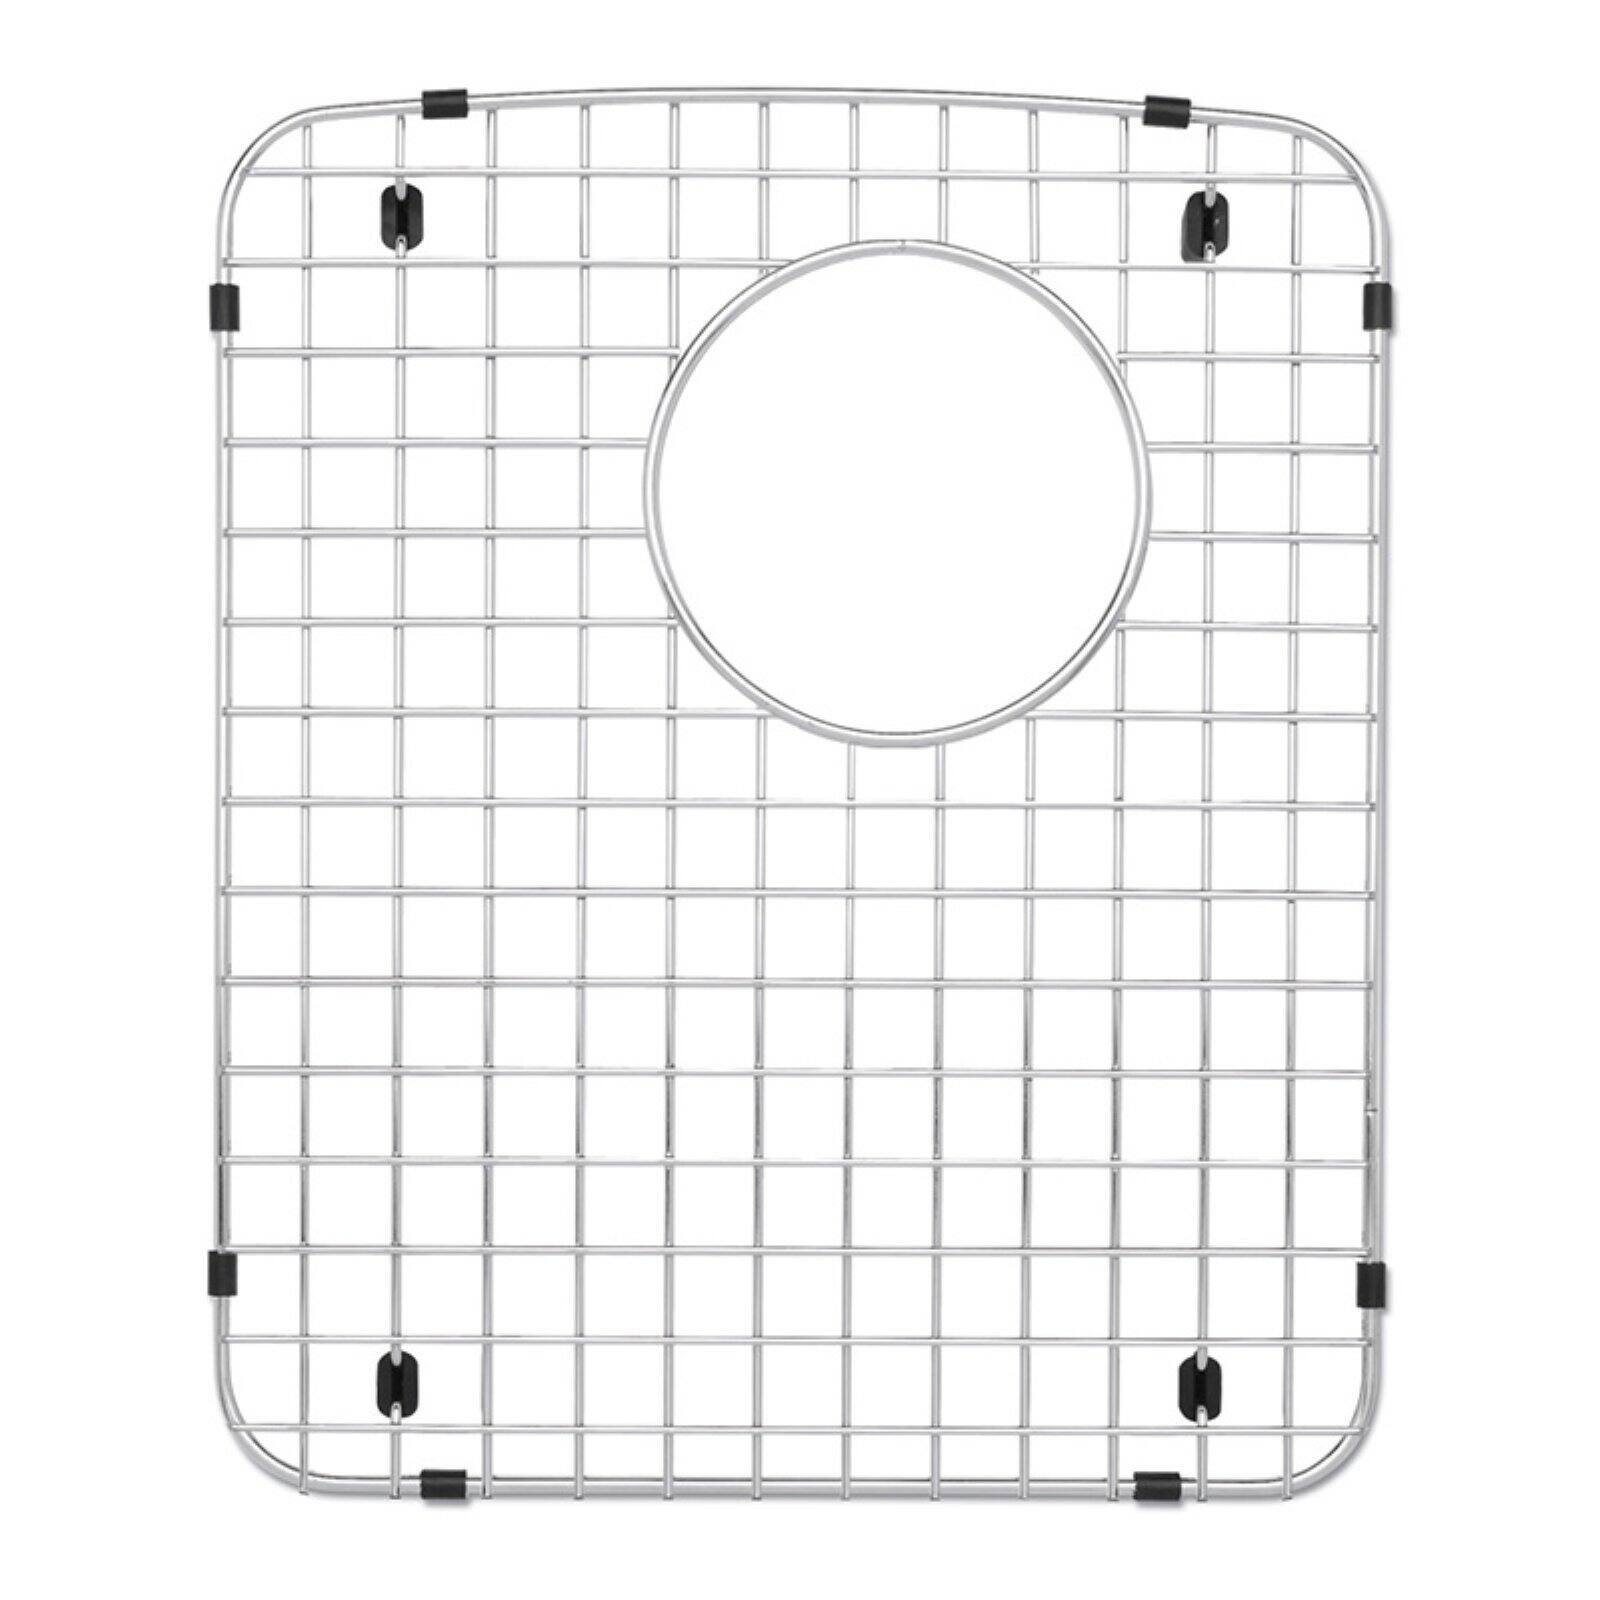 Blanco 221008 15-1/4" x 12-3/4" Stainless Steel Sink Grid (Diamond Double Left Bowl) - image 2 of 5